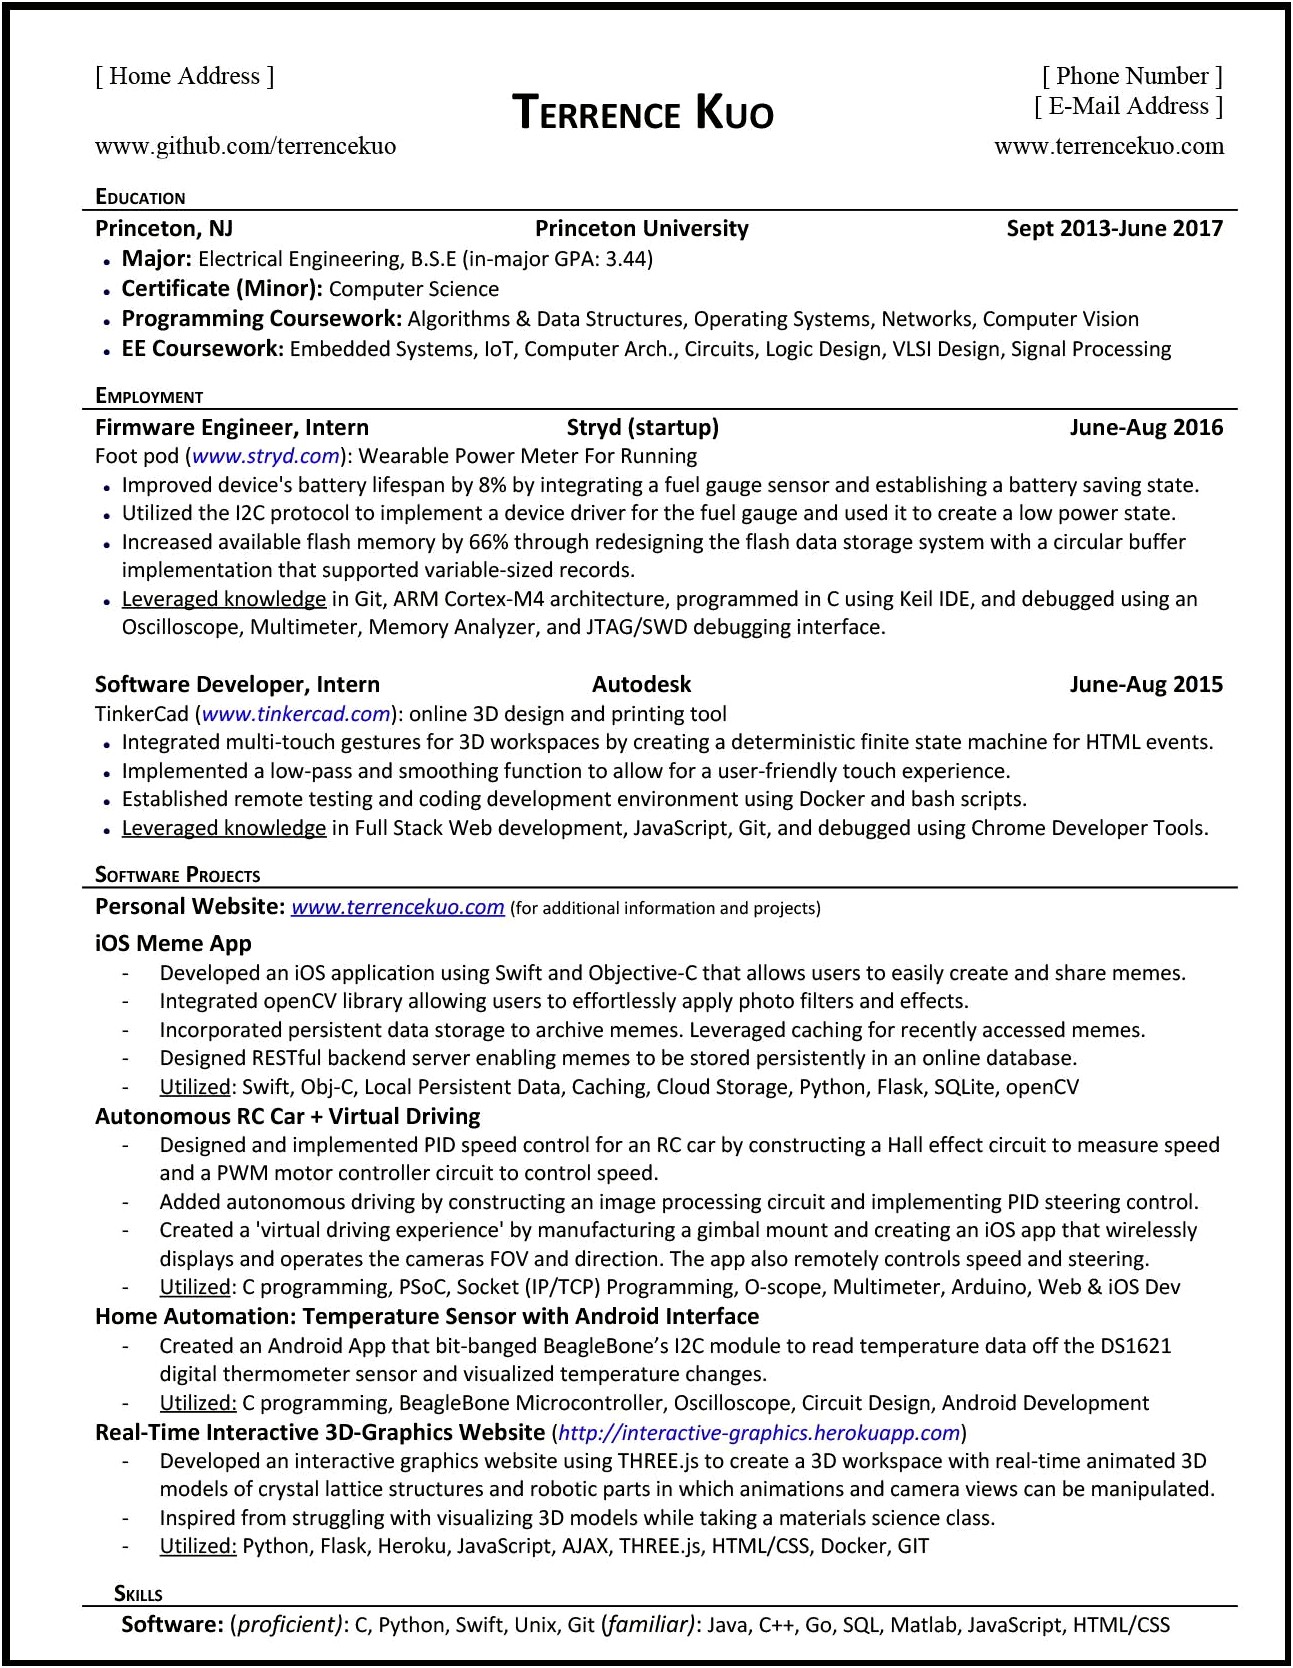 Sample Resume For Experienced Electrical Project Engineer